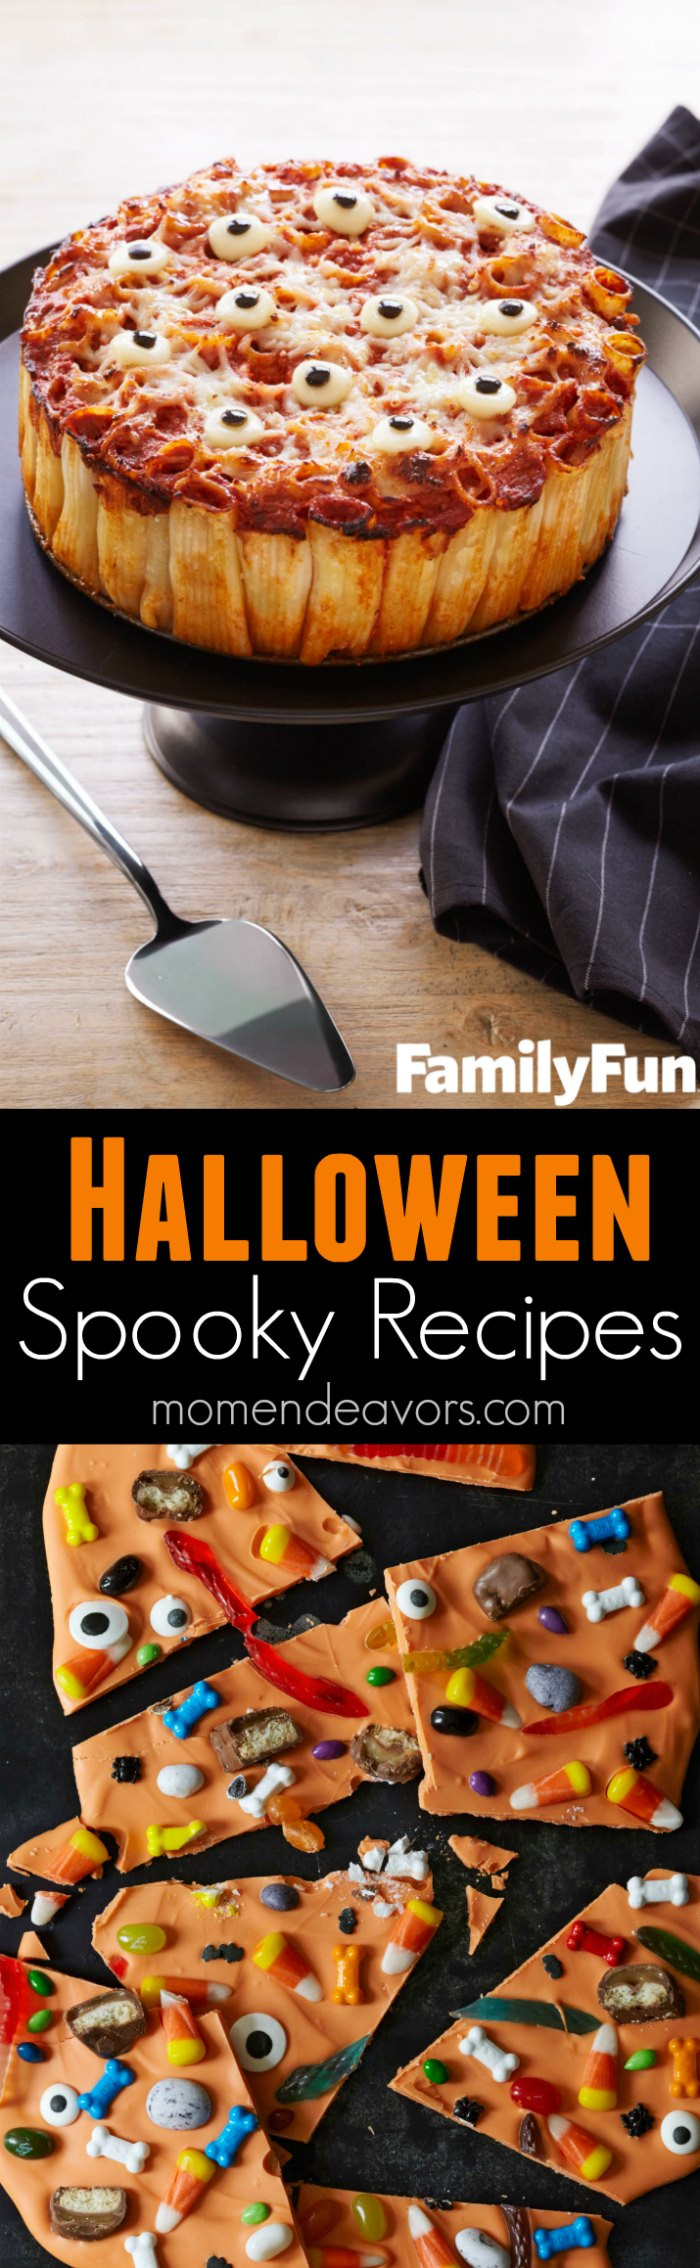 Creepy Food Ideas For Halloween Party
 Spooky Halloween Party Recipes